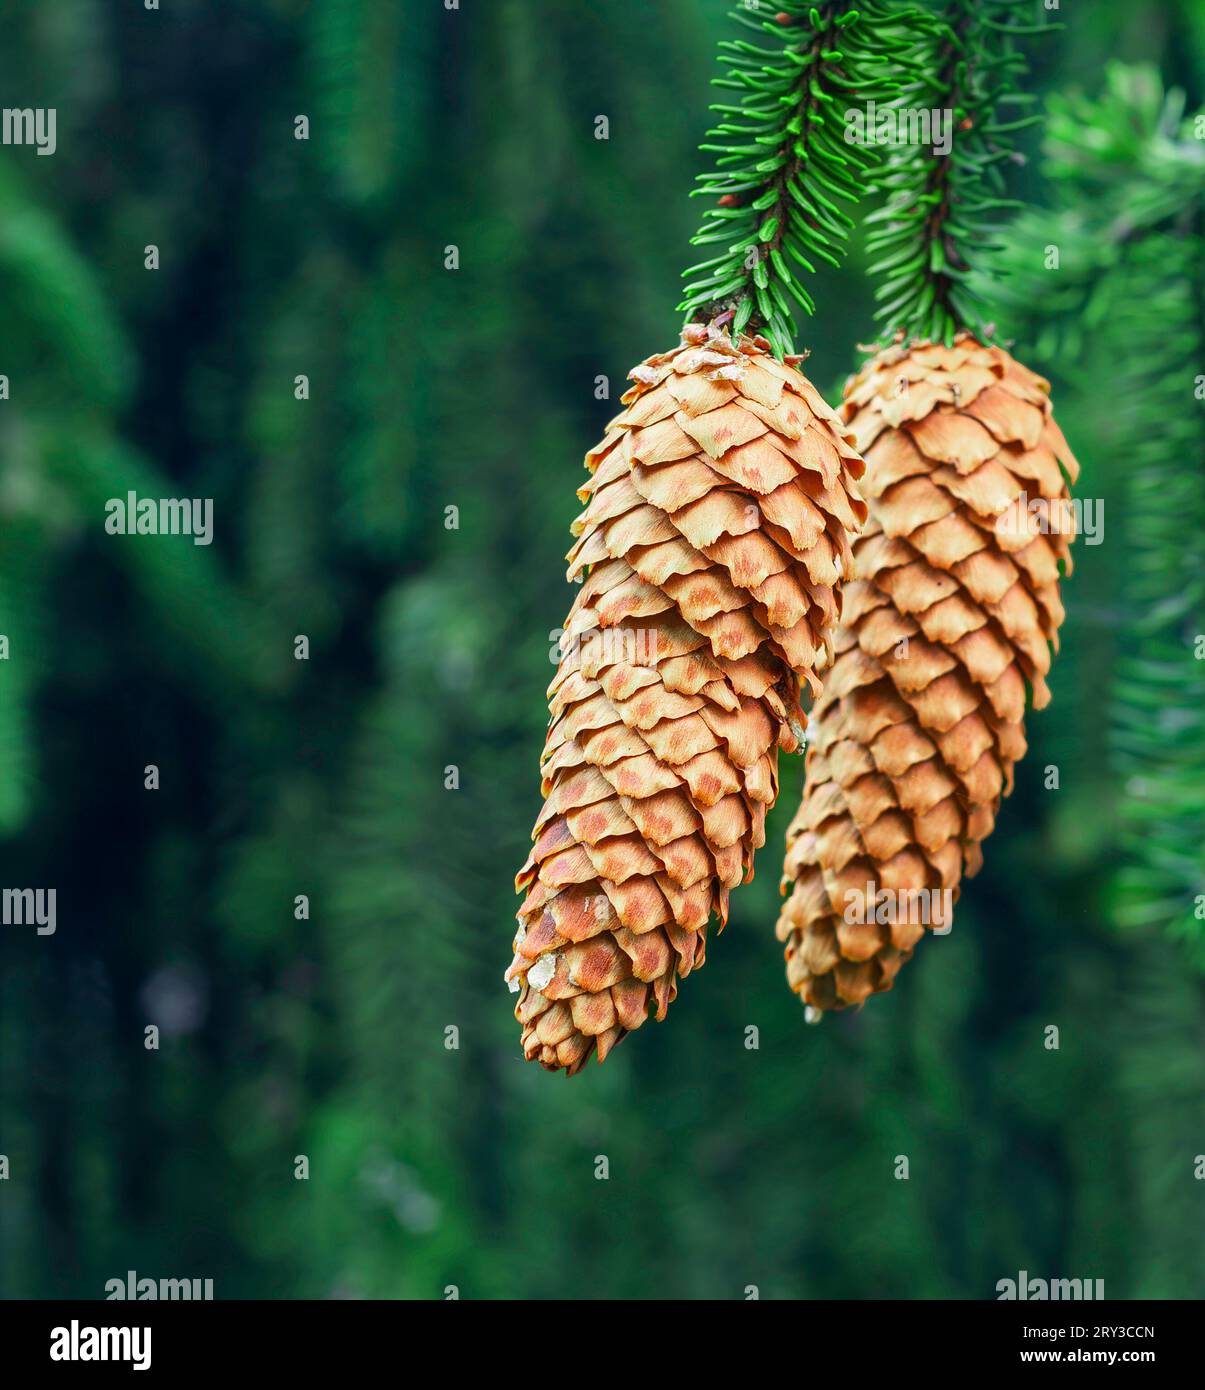 Fir Cones hanging from Norway Spruce Tree Stock Photo